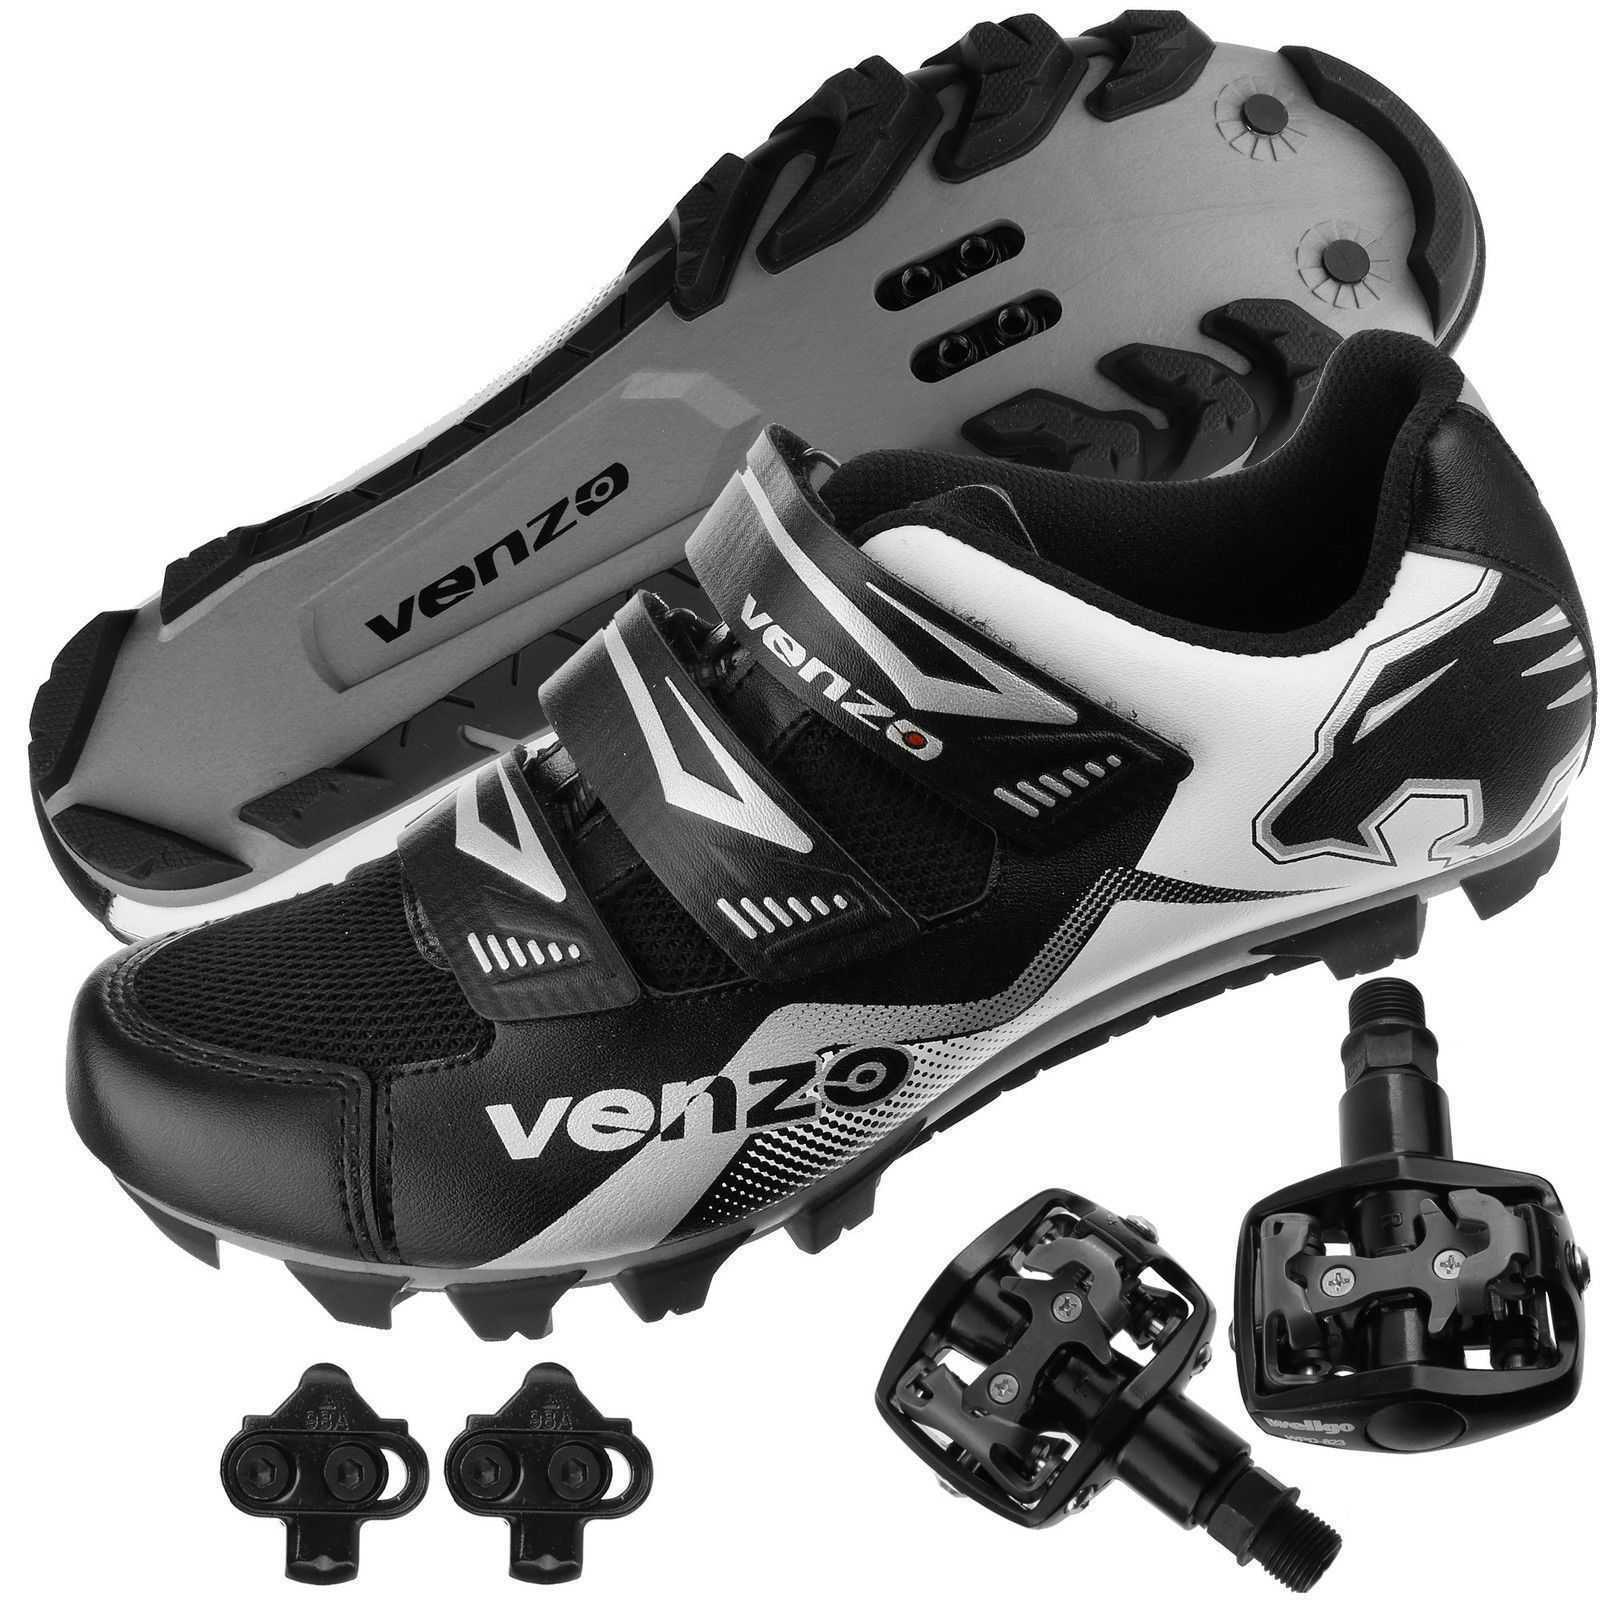 wellgo mountain bike clipless pedals shimano spd with cleats